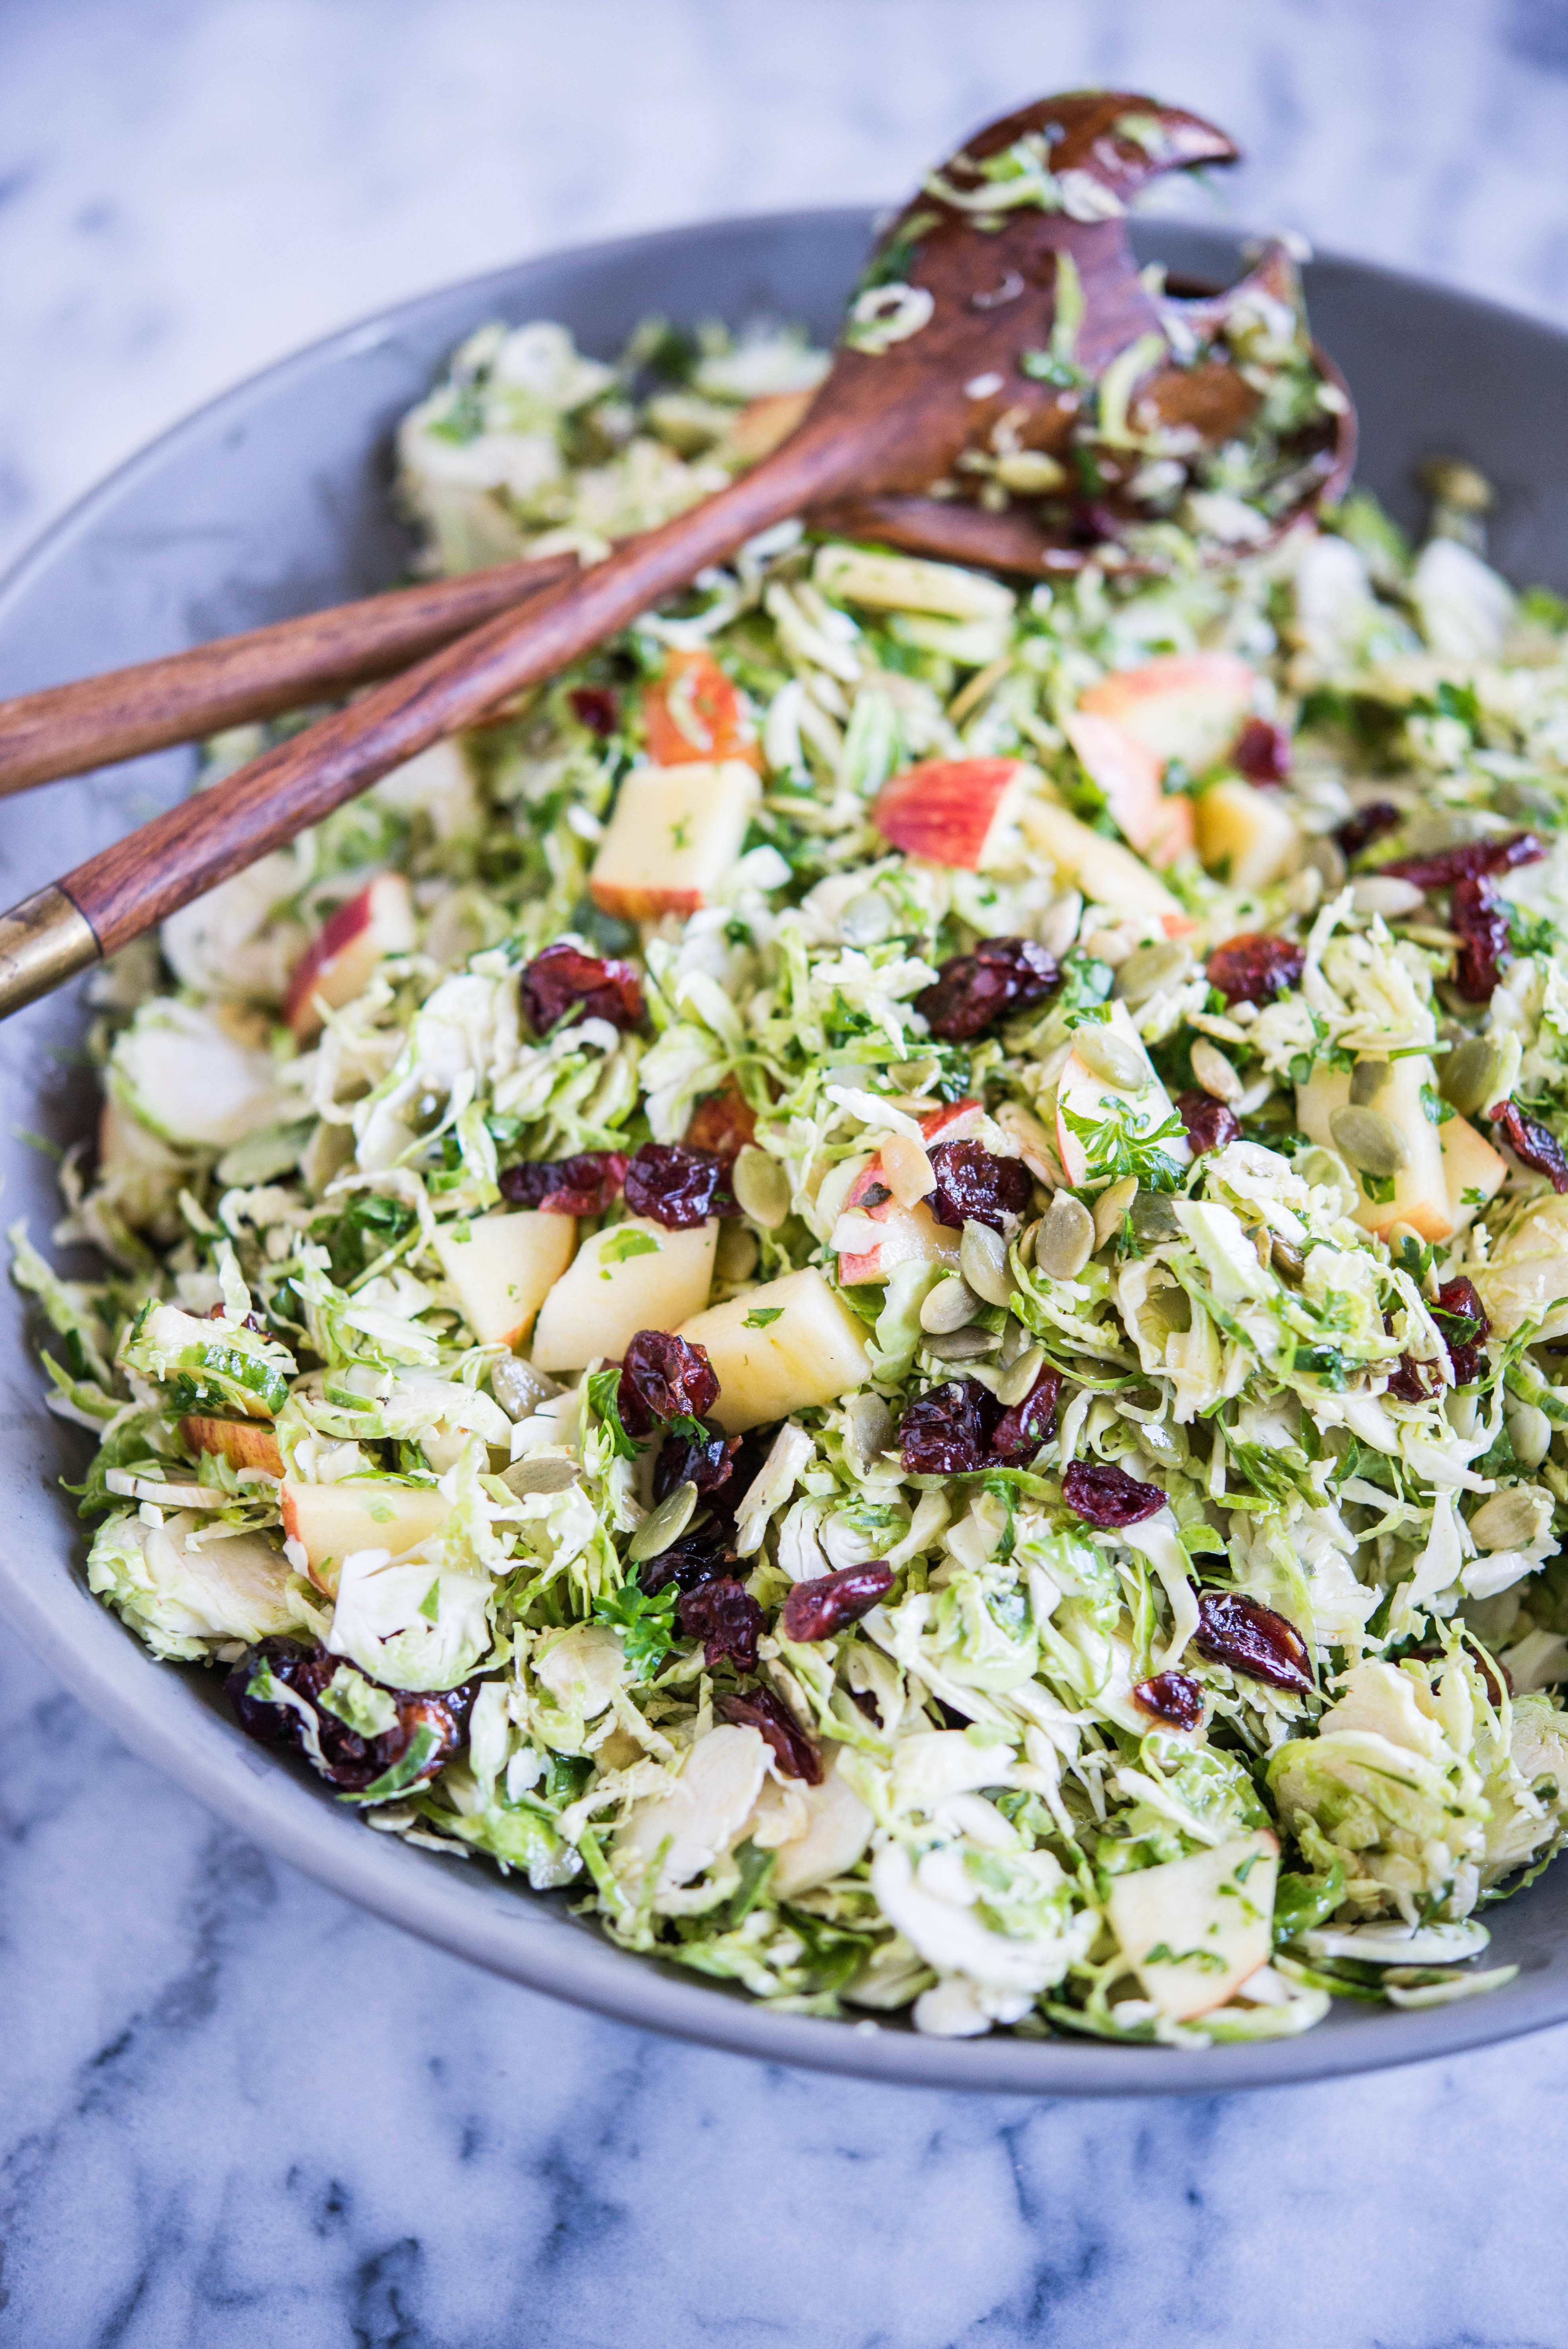 shaved brussels sprouts salad with apples and cranberries in a grey bowl on a marble surface